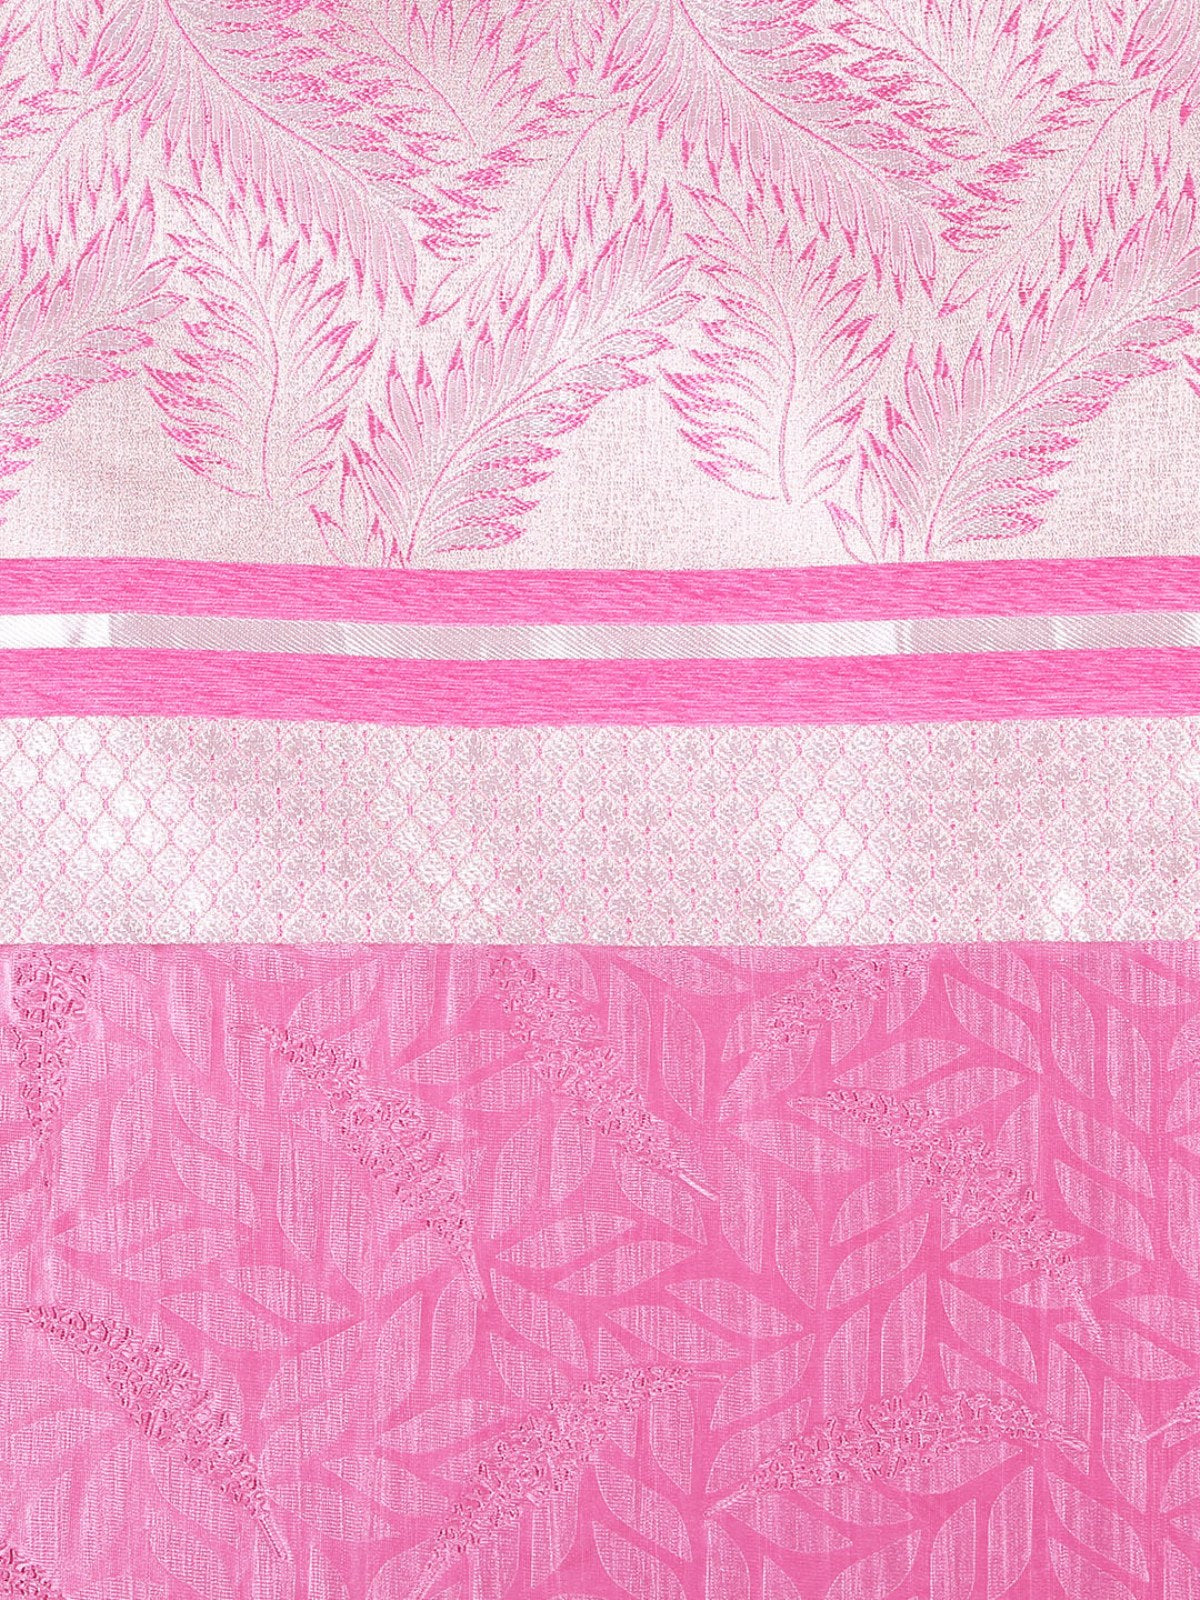 Romee Pink Leafy Patterned Set of 1 Door Curtains